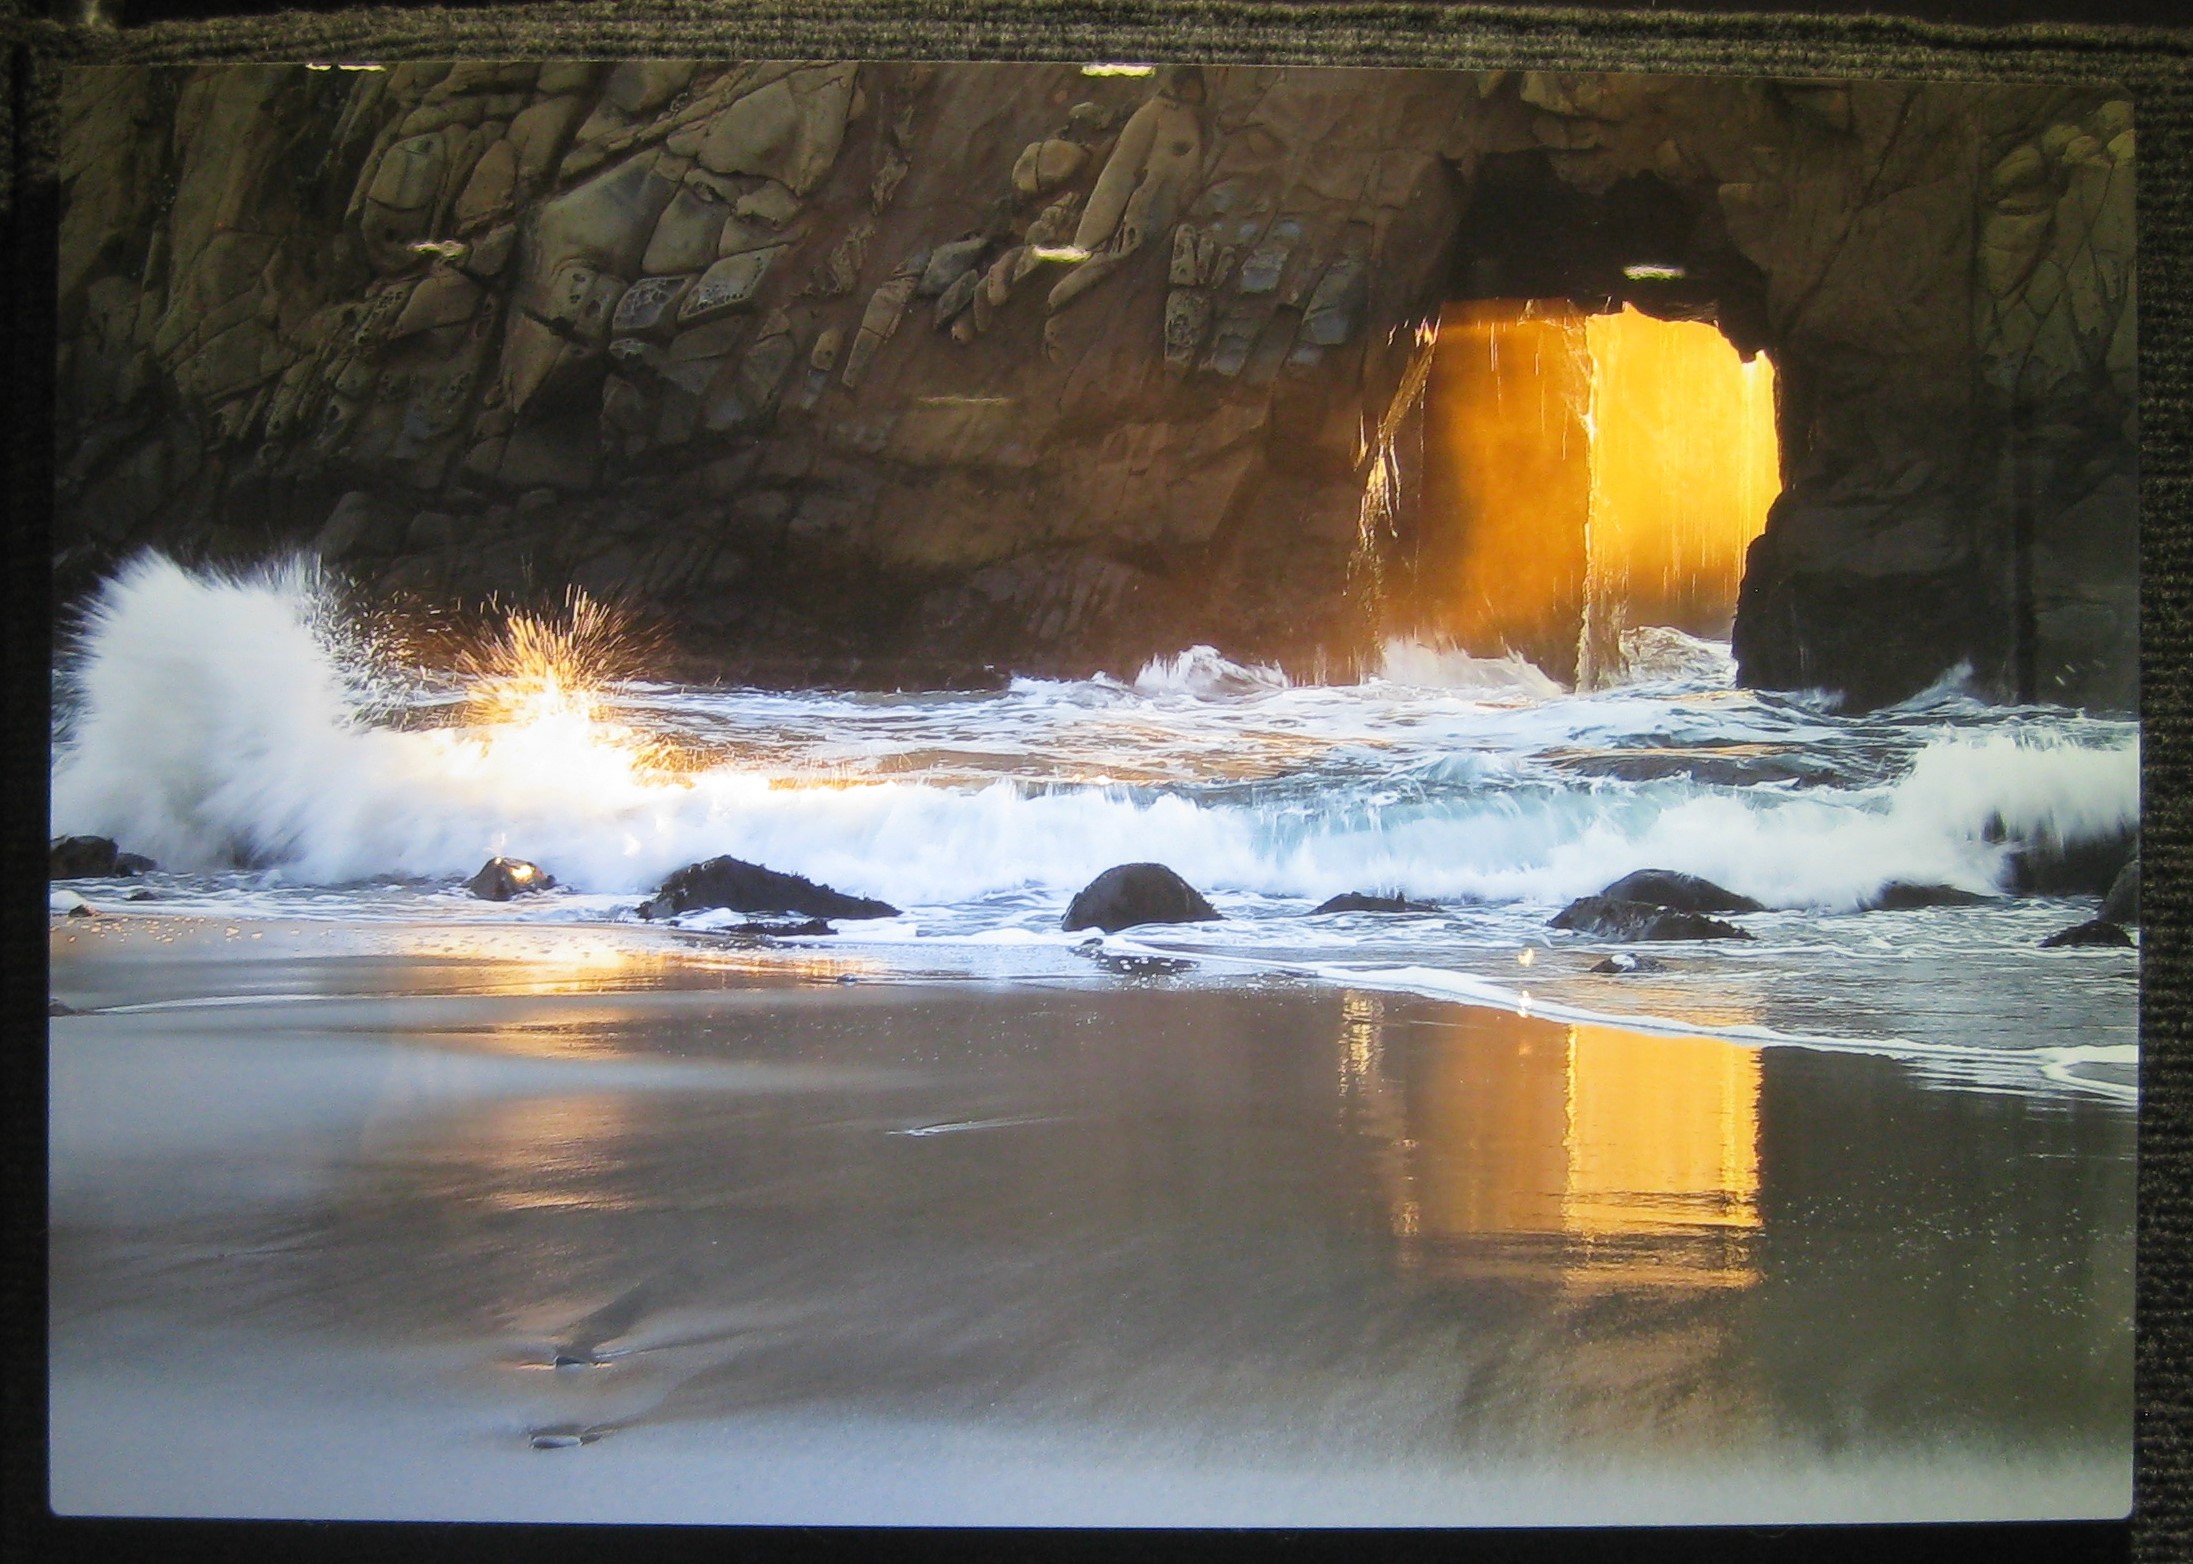 A fine photographic print, it was a gift of chance for the shooter (note the sunlight hitting the wave spray at left center).